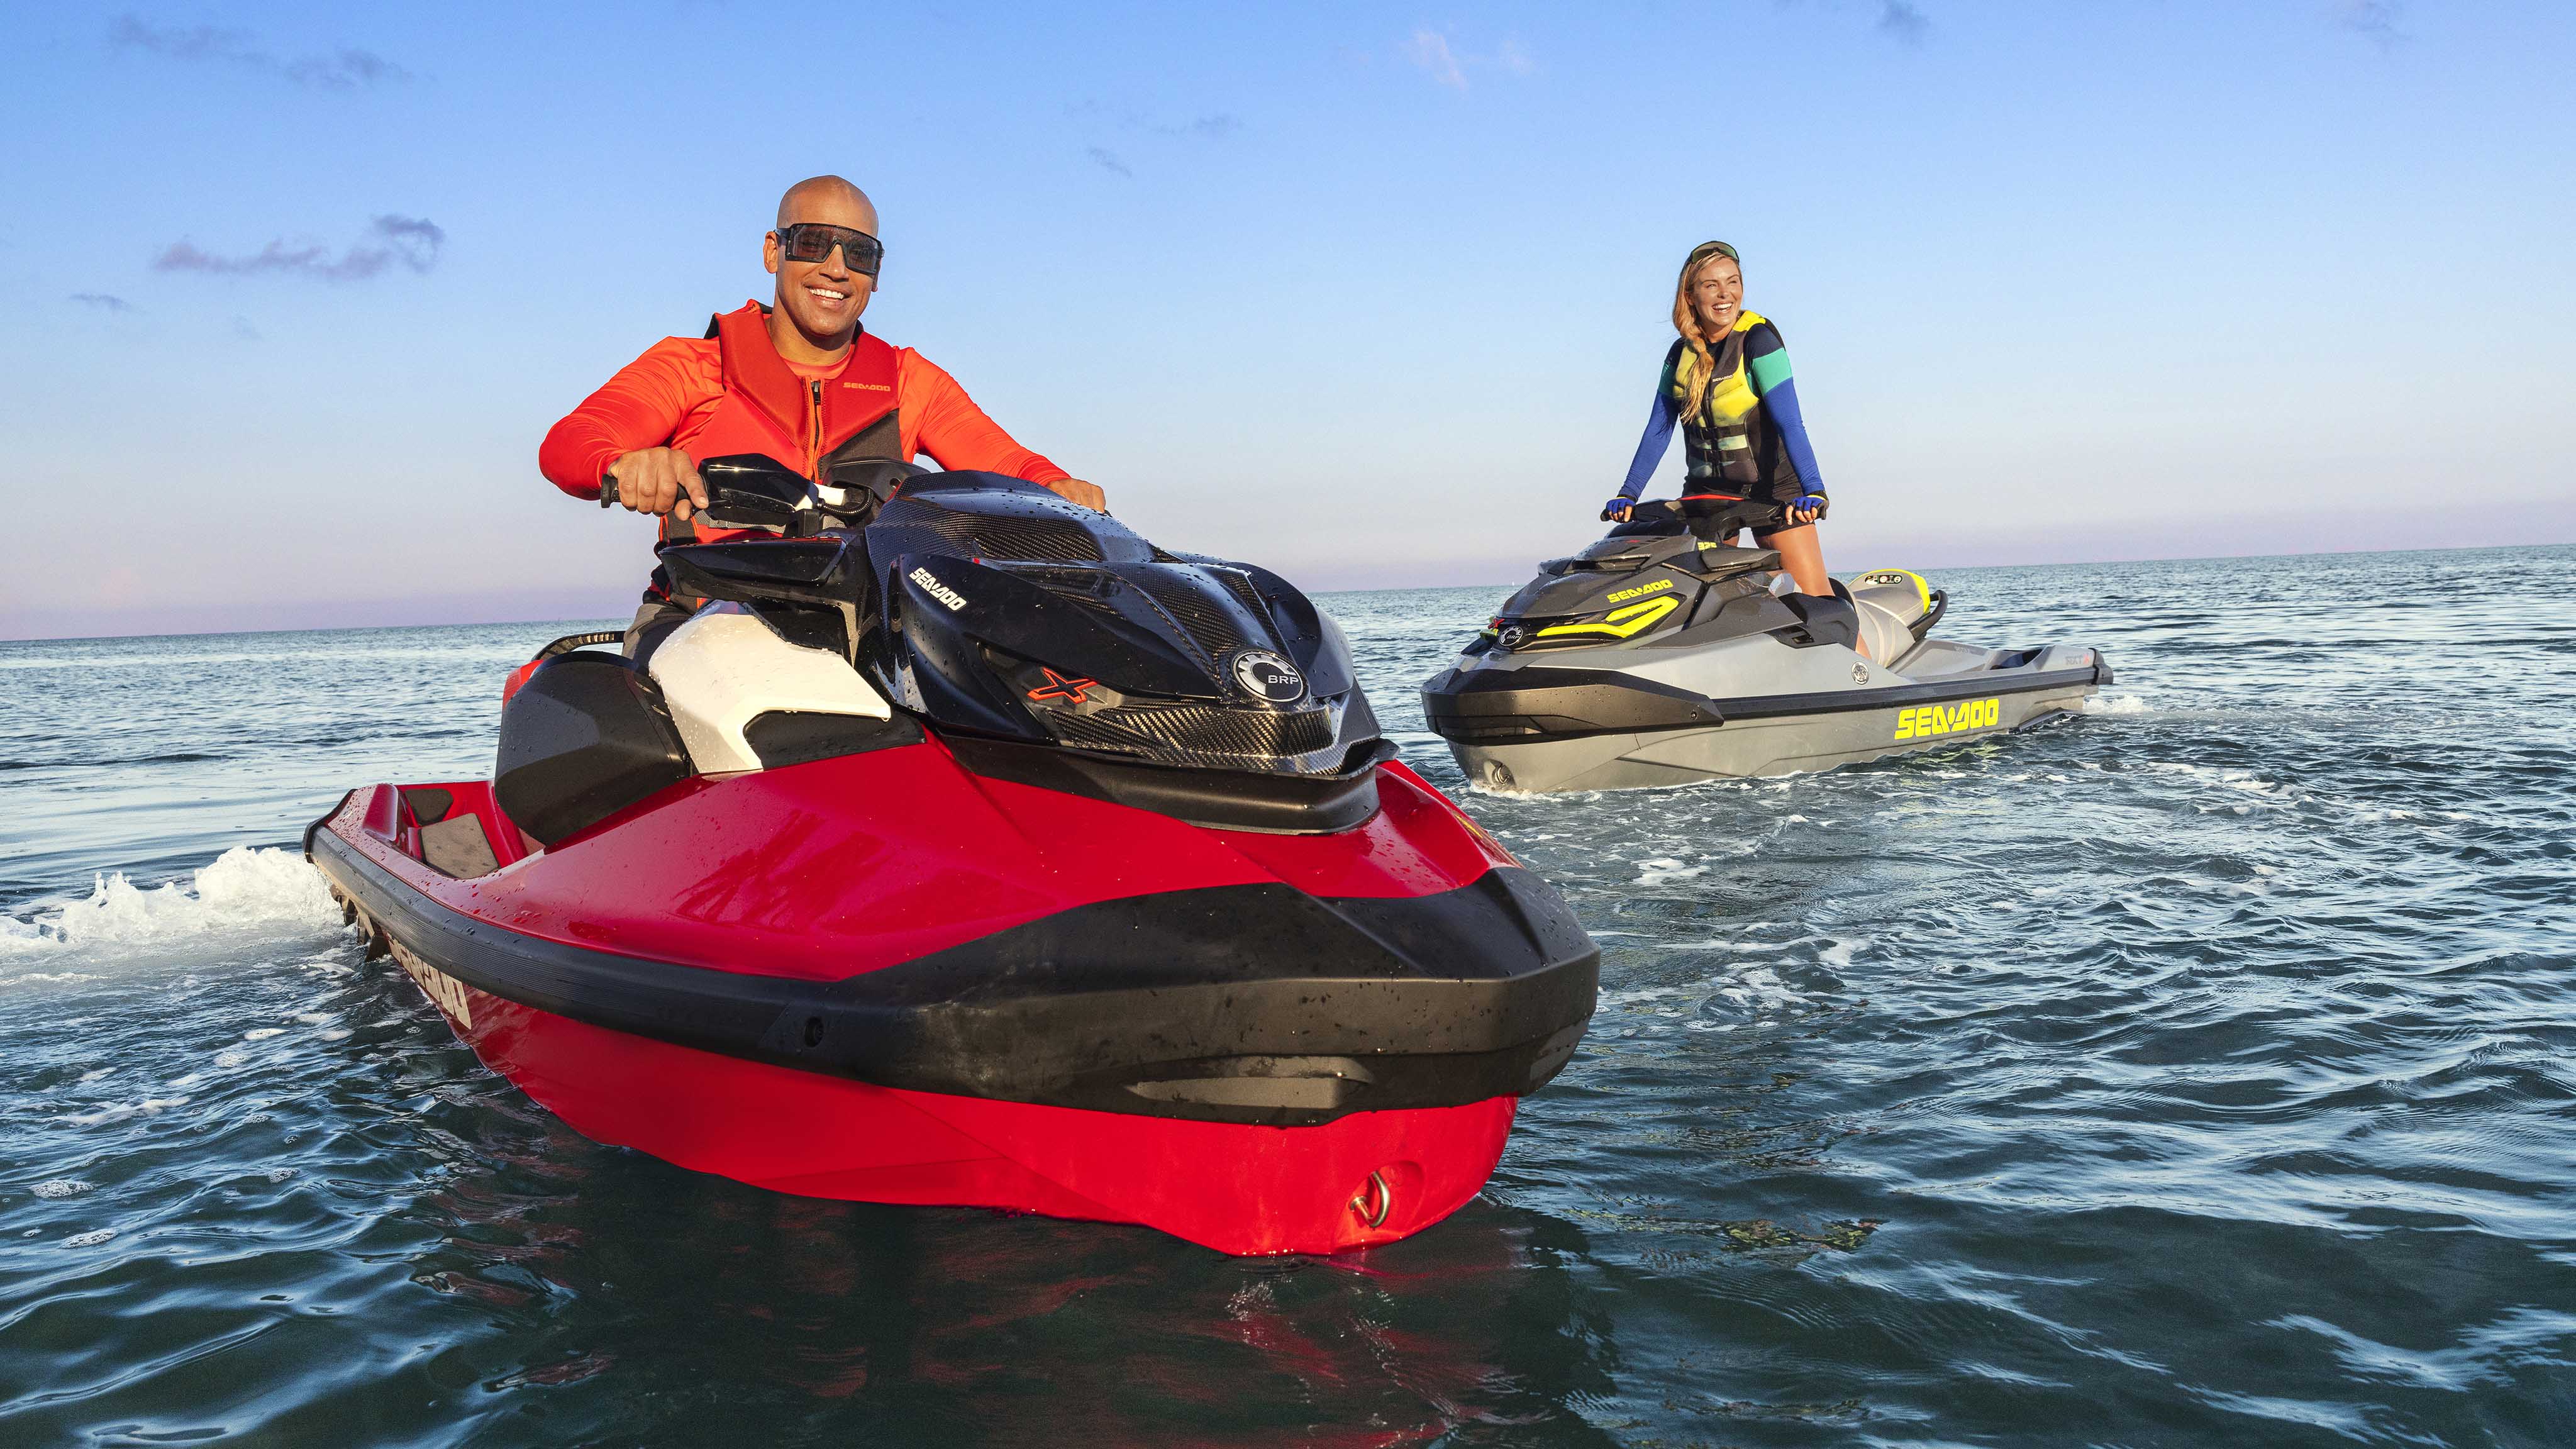 Two friends riding Sea-Doo personal watercrafts